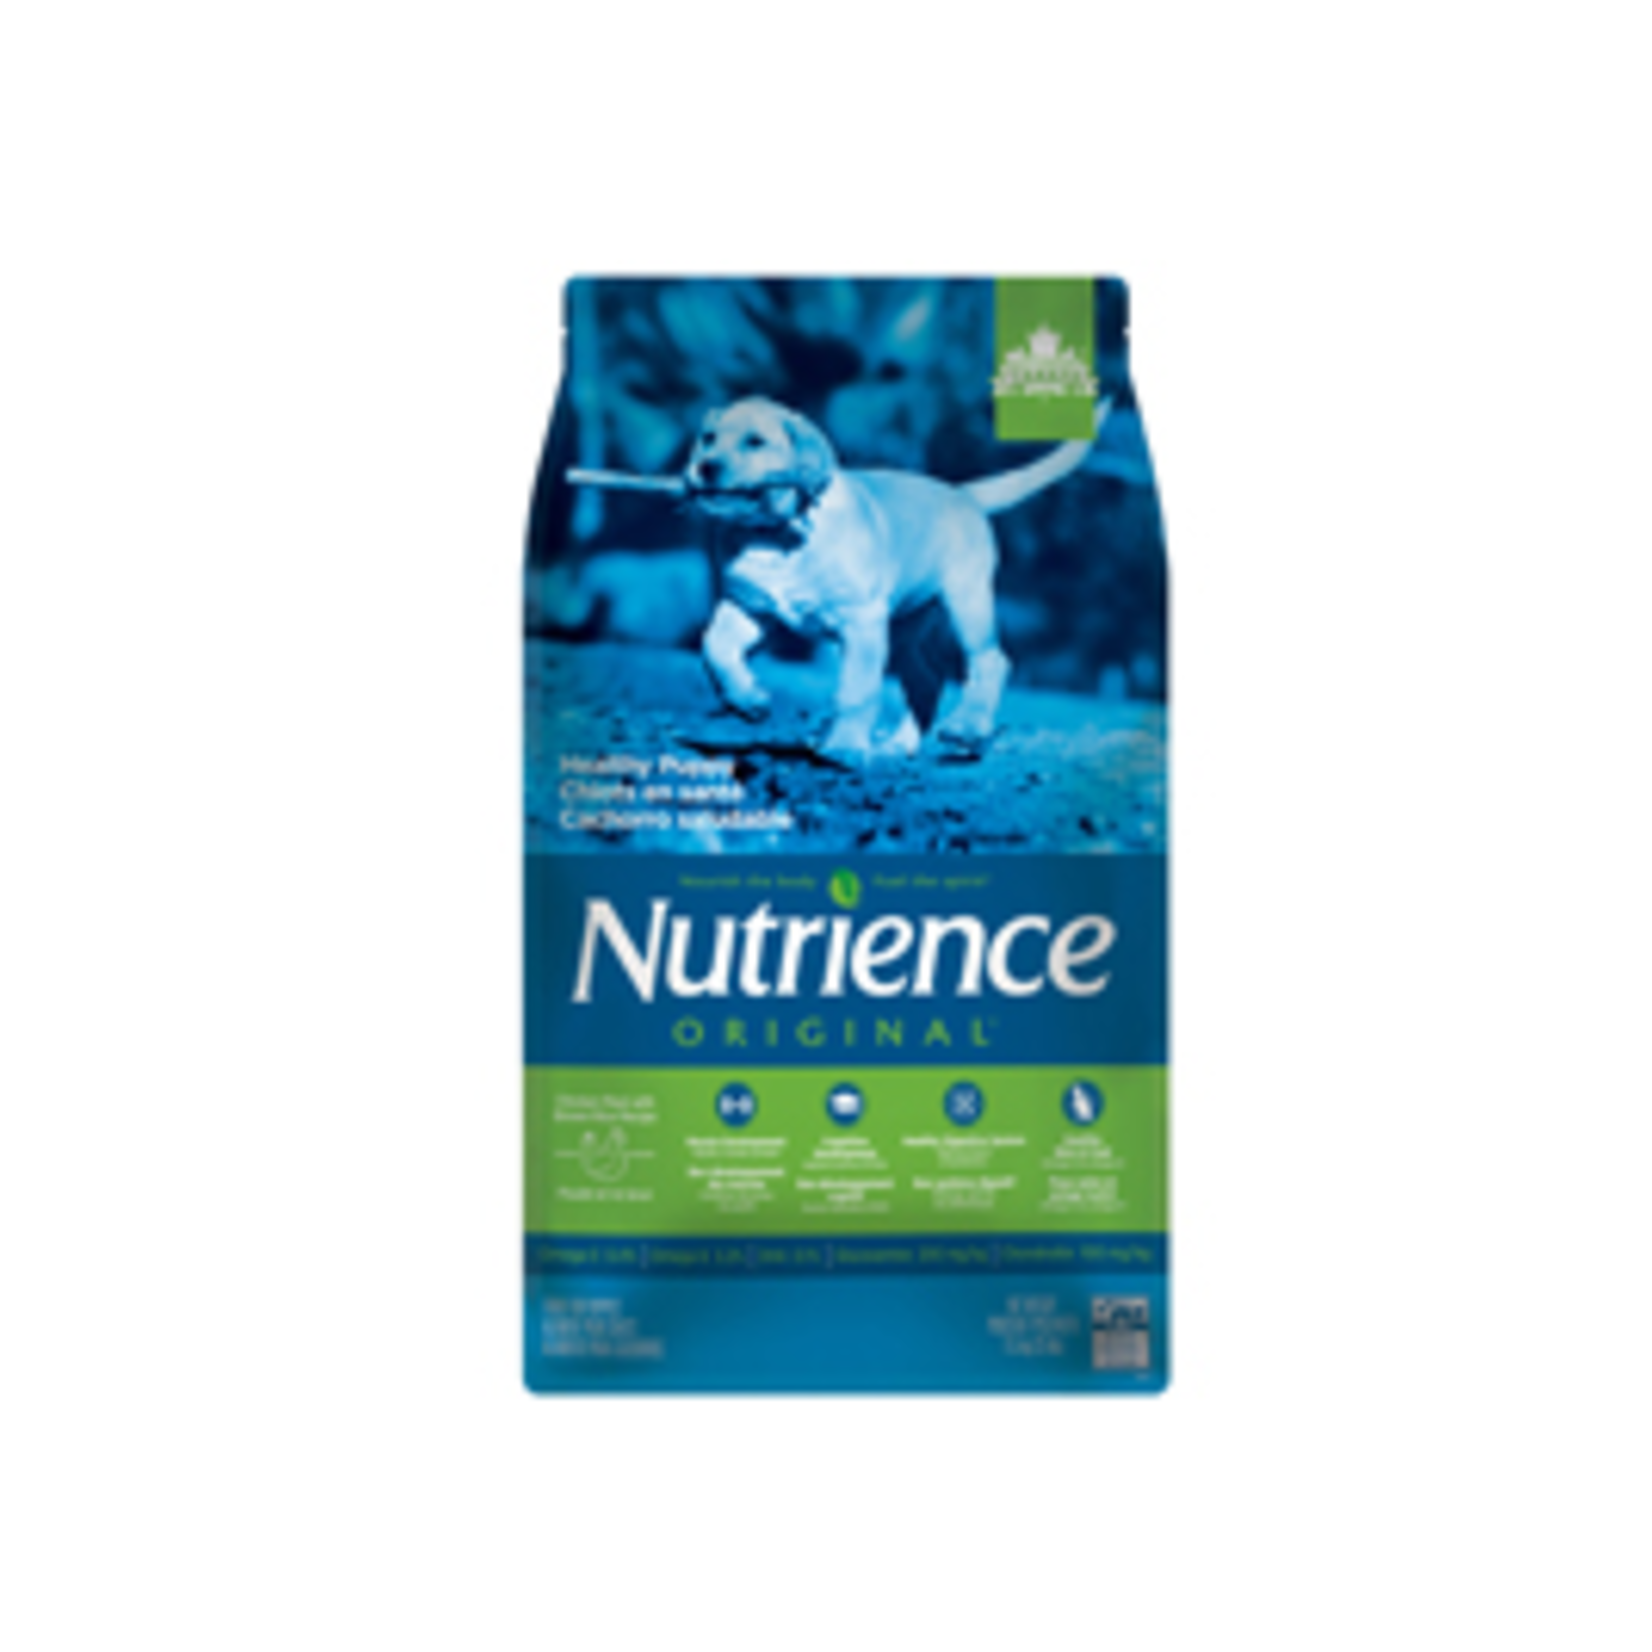 Nutrience Original - Puppy - Chicken with Brown Rice - 25 lbs